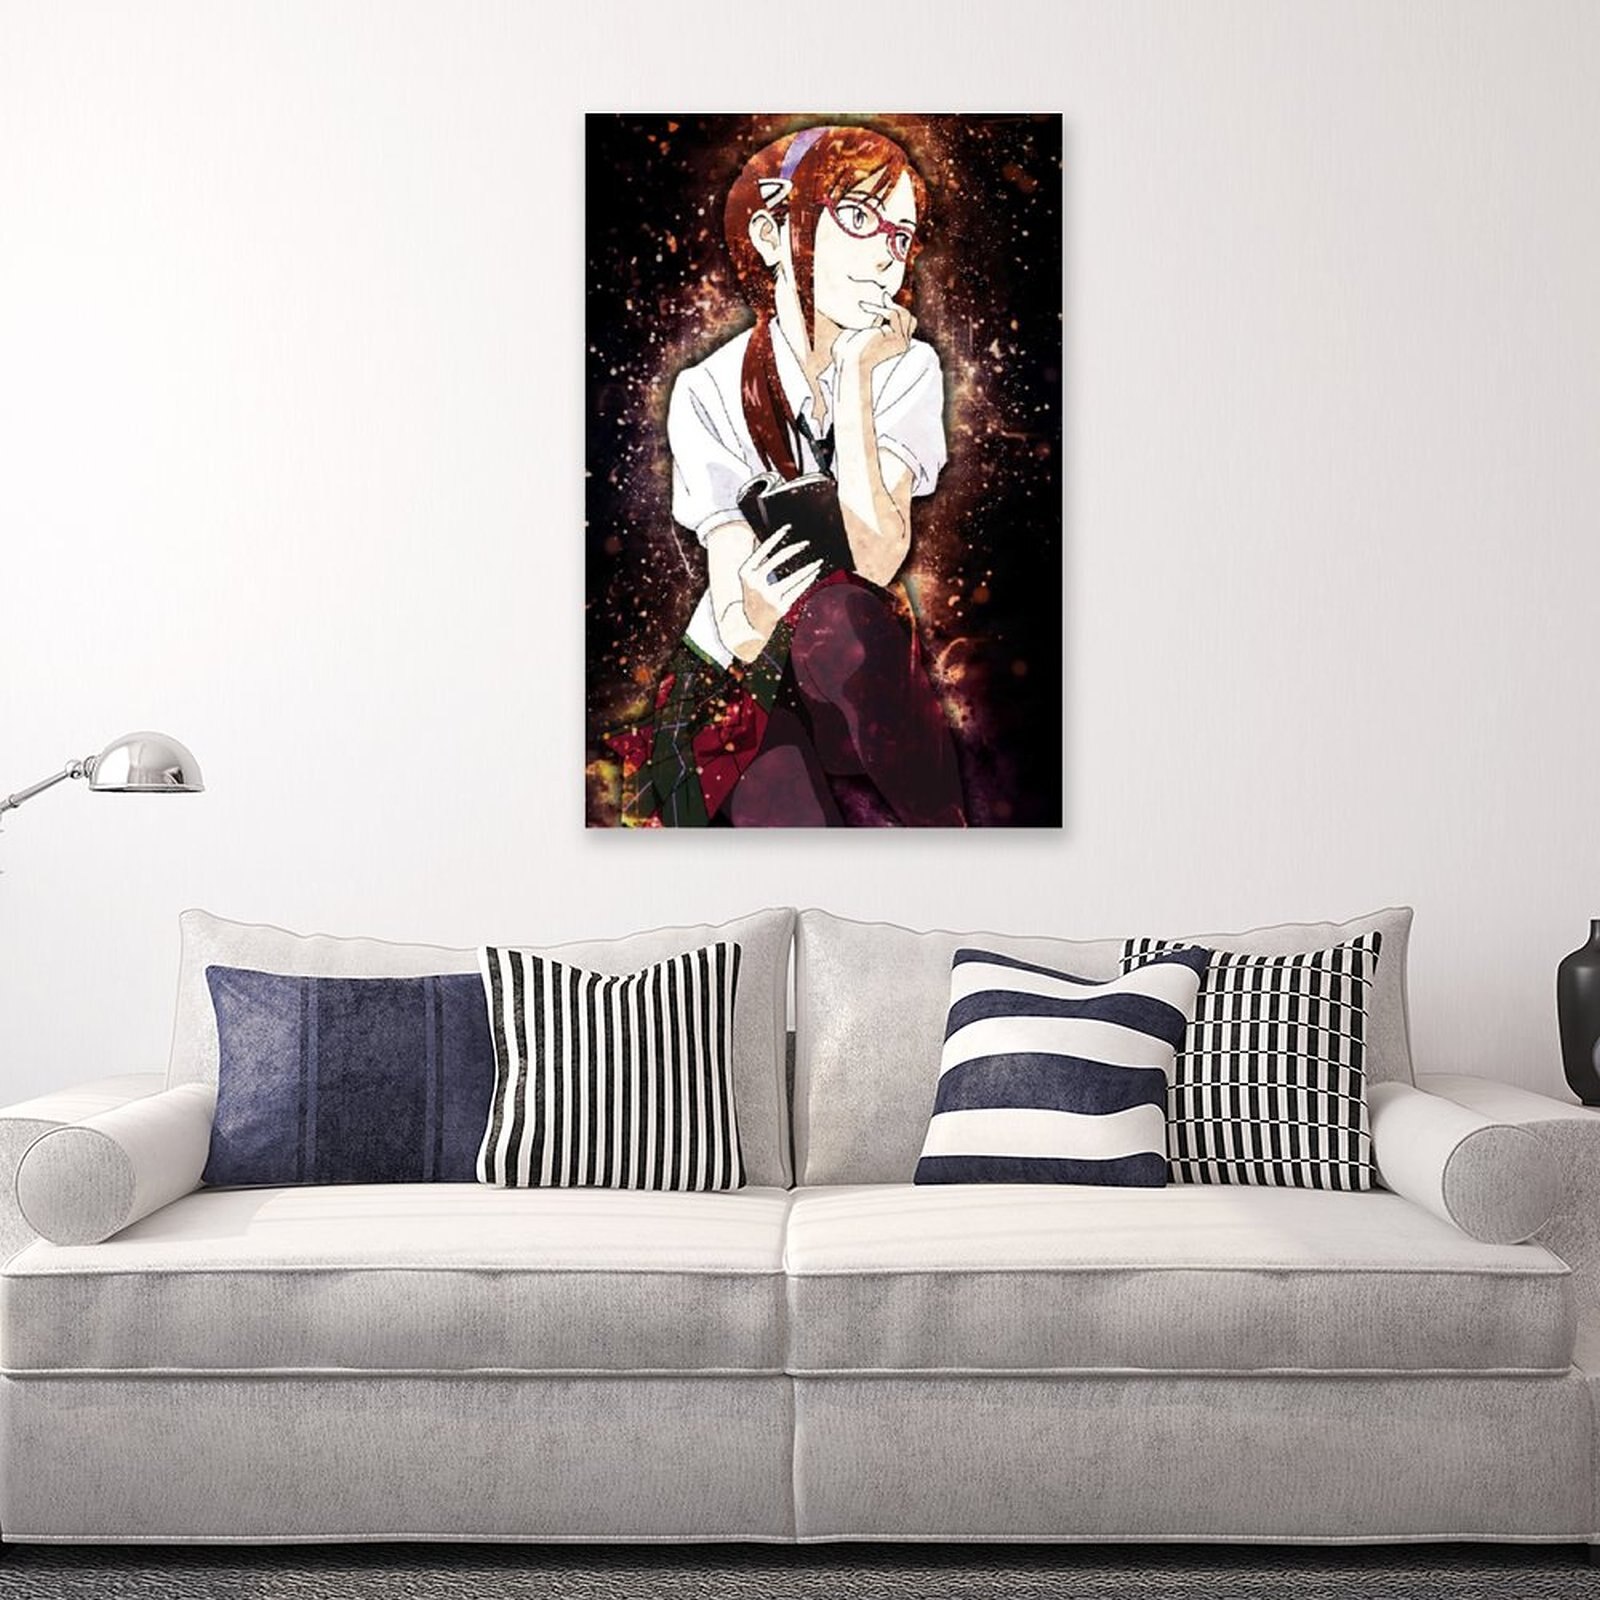 Anime Evangelion Makinami GirlCanvas Painting Wall Art Posters and Prints Wall Pictures for Living Room Decoration 4 - Evangelion Shop